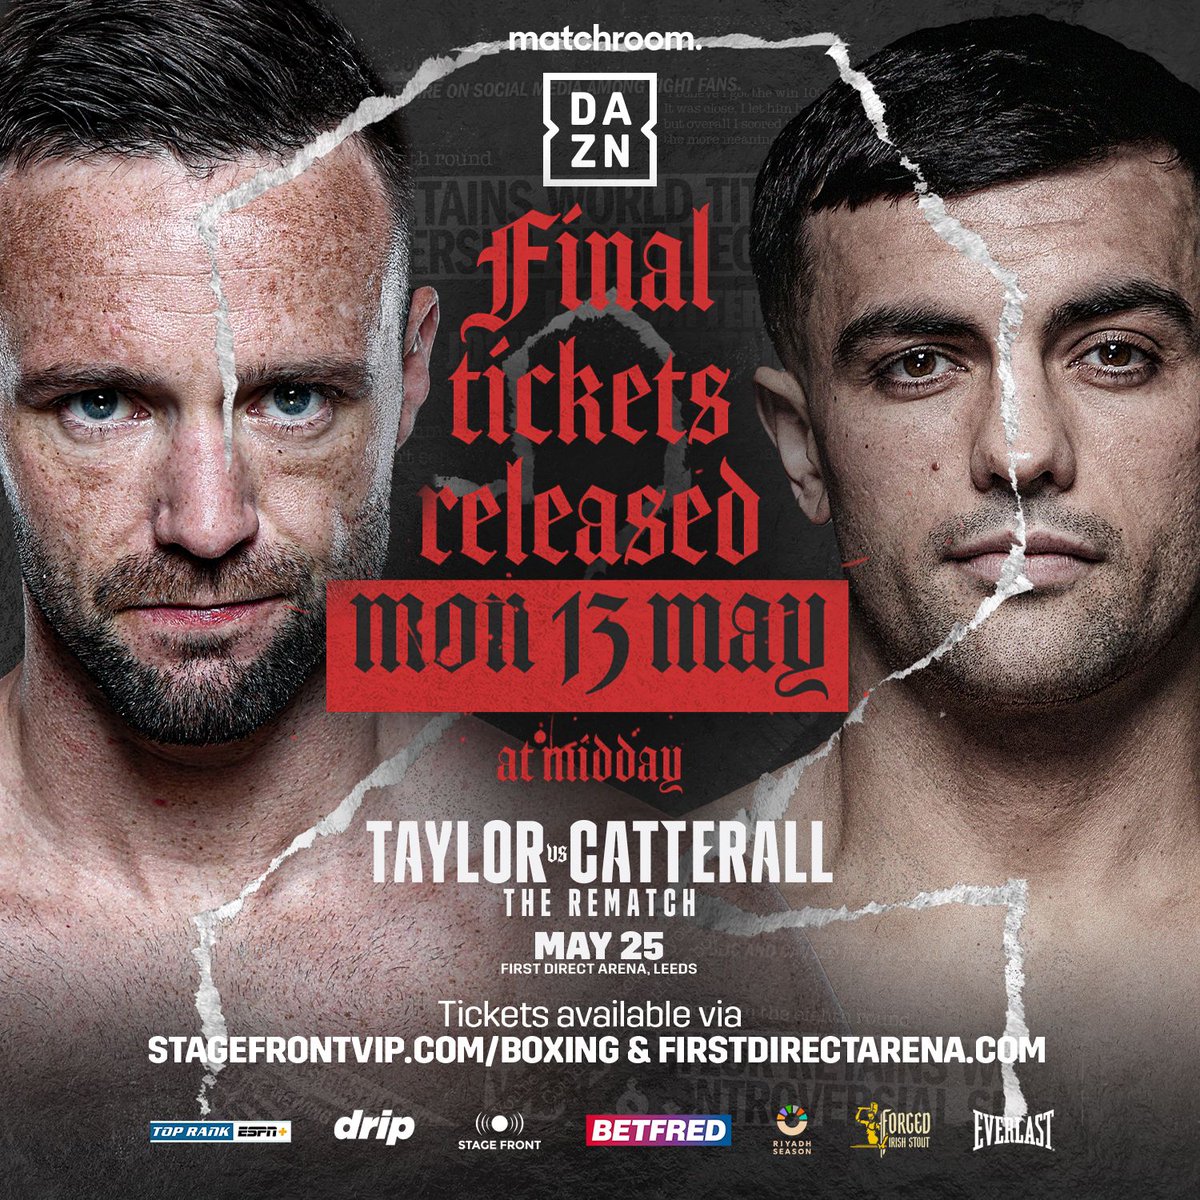 🎟️ A limited number of #TaylorCatterall2 tickets are released 𝘁𝗼𝗺𝗼𝗿𝗿𝗼𝘄 𝗮𝘁 𝗺𝗶𝗱𝗱𝗮𝘆 🚨 Join us in Leeds on May 25 😤 @JoshTaylorBoxer @jack_catt93 @fdarena @StageFrontVIP @EddieHearn @trboxing